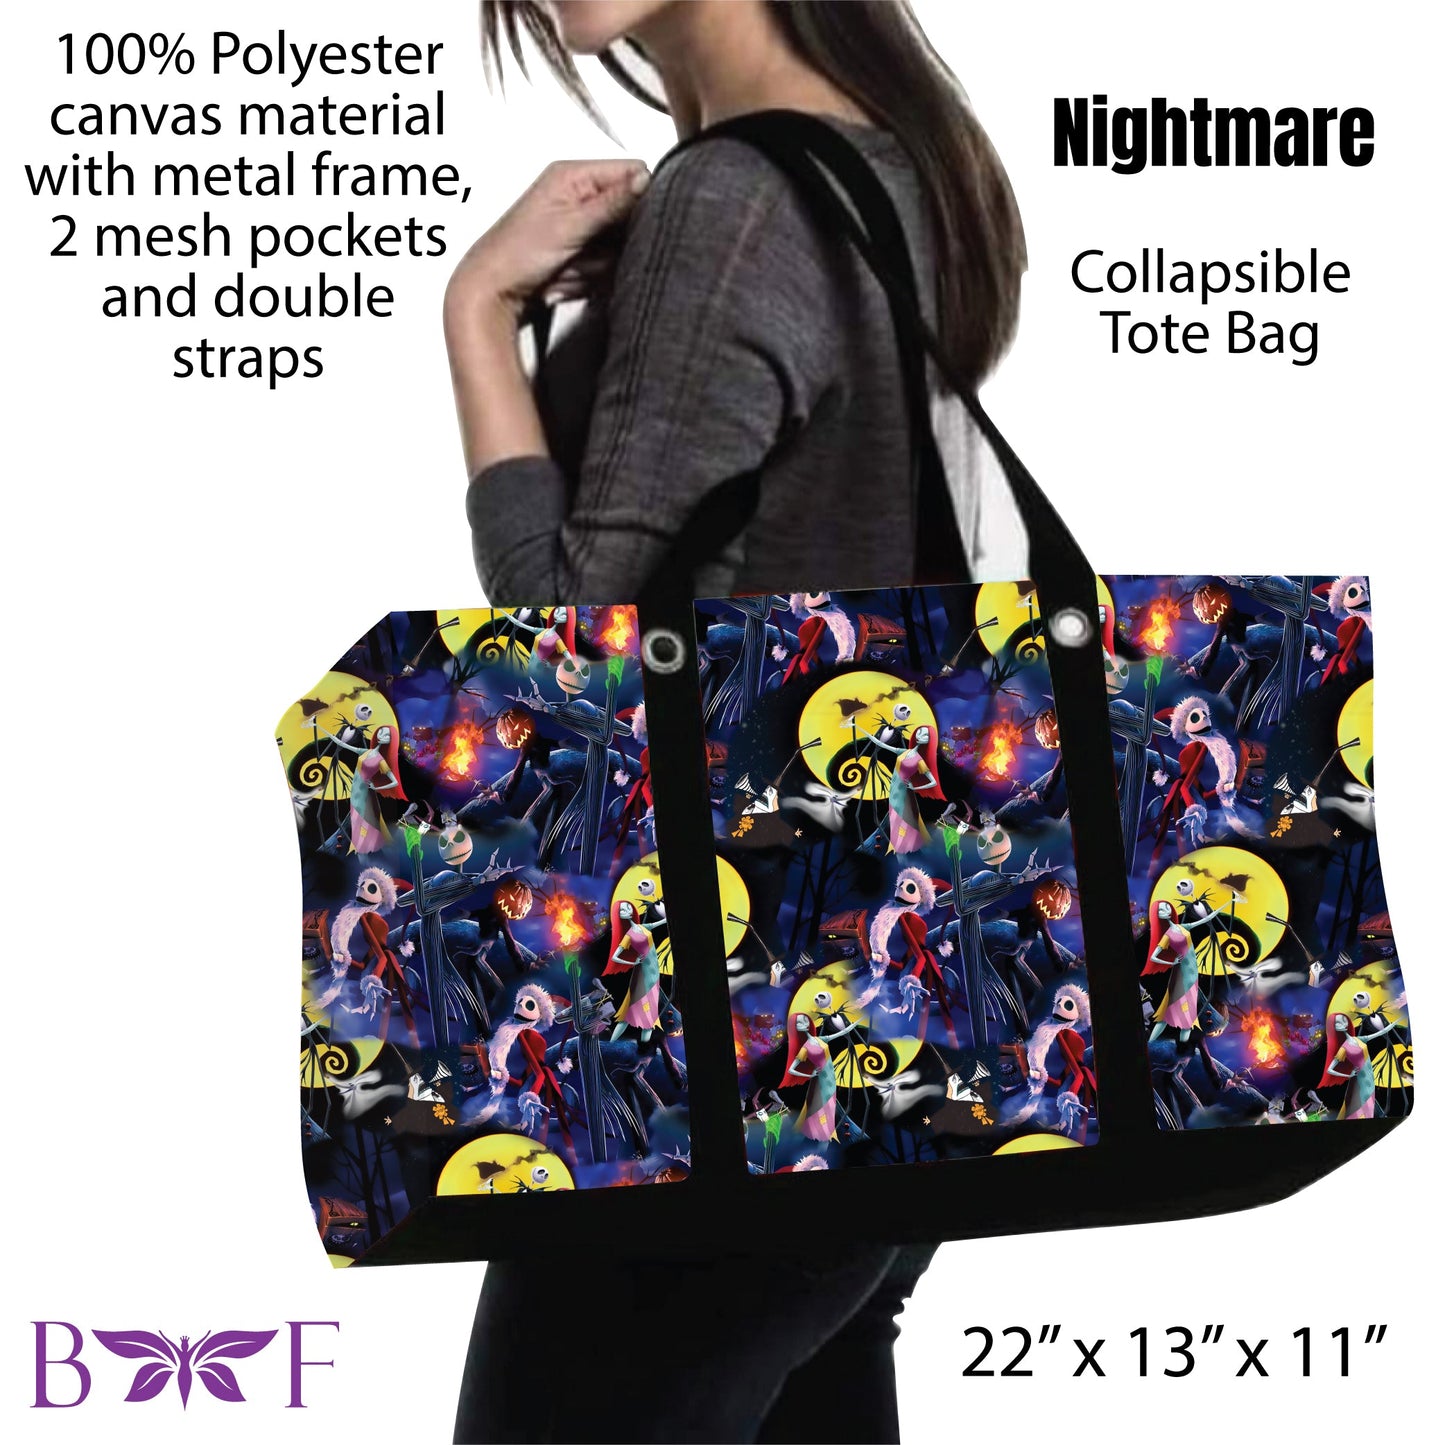 Nightmare tote and 2 inside mesh pockets